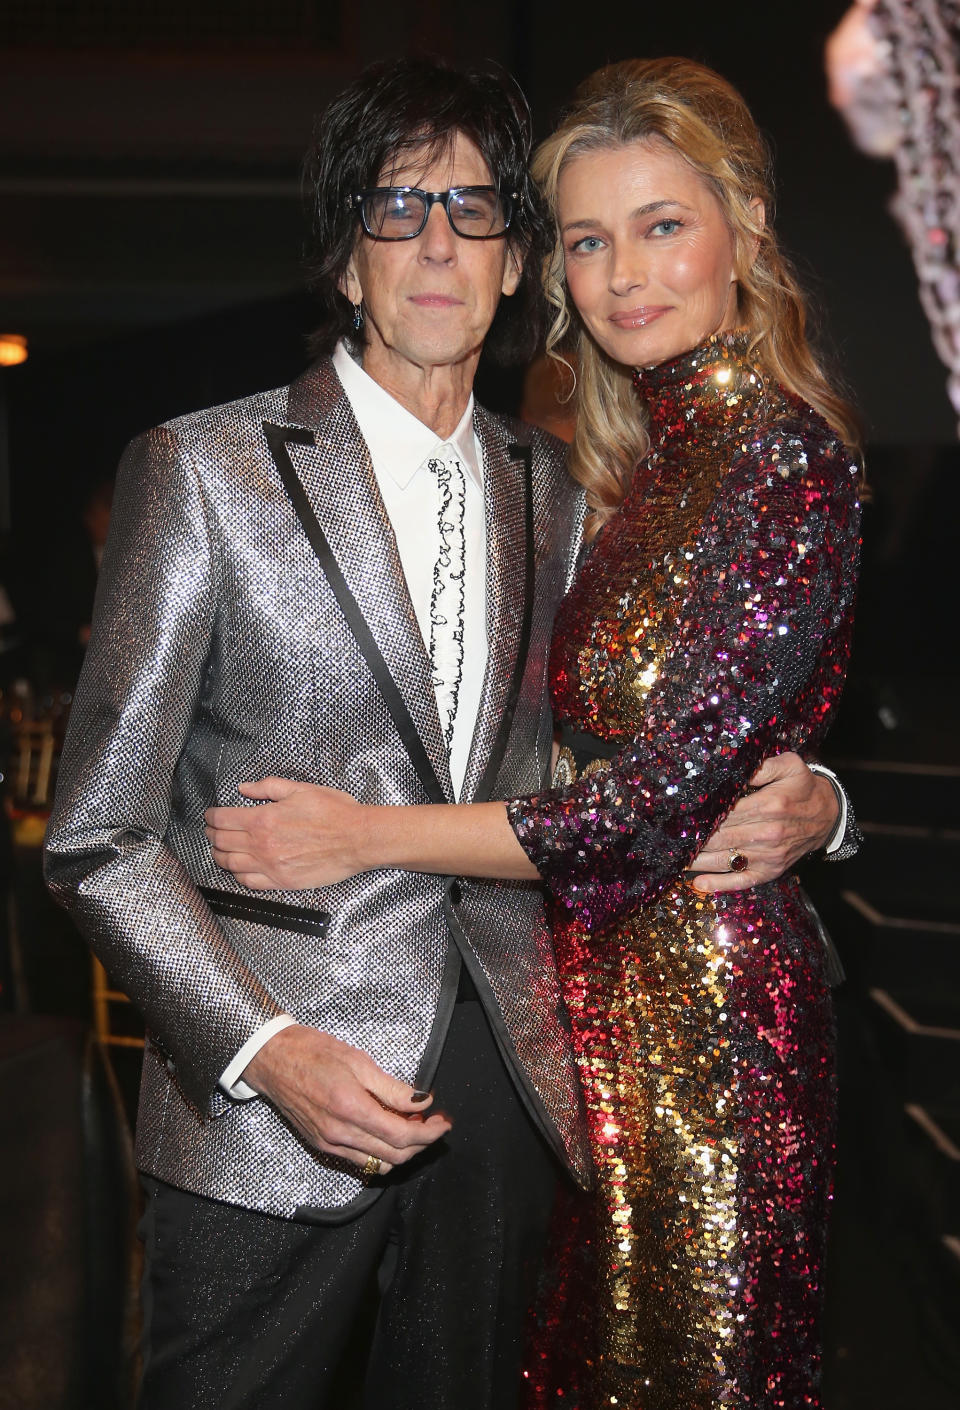 Ric Ocasek and Paulina Porizkova at the 33rd Annual Rock & Roll Hall of Fame Induction Ceremony on April 14, 2018. (Photo: Kevin Kane/Getty Images For The Rock and Roll Hall of Fame)